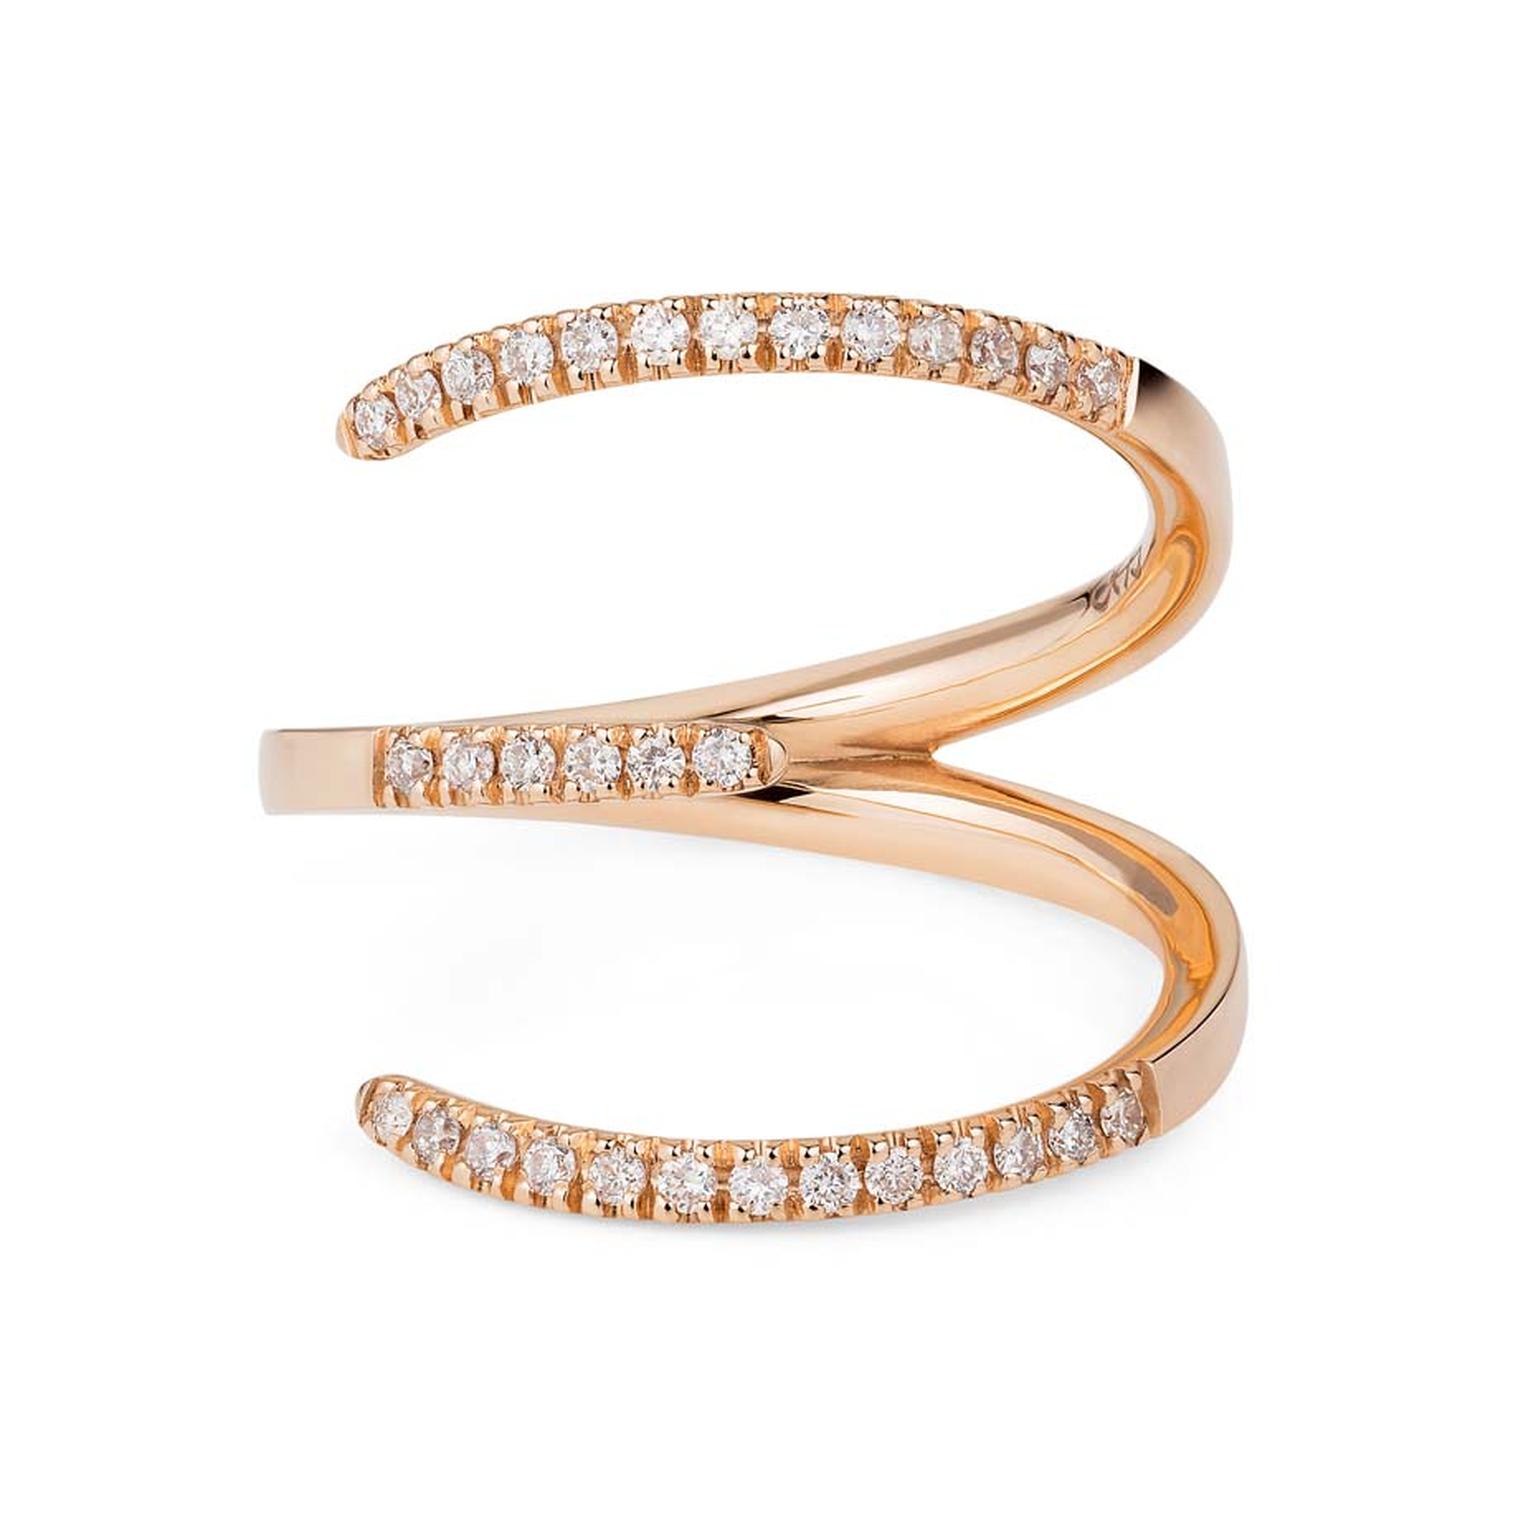 Sarah Ho Number 3 rose gold ring with diamonds, from the new Numerati collection (from £1,600).